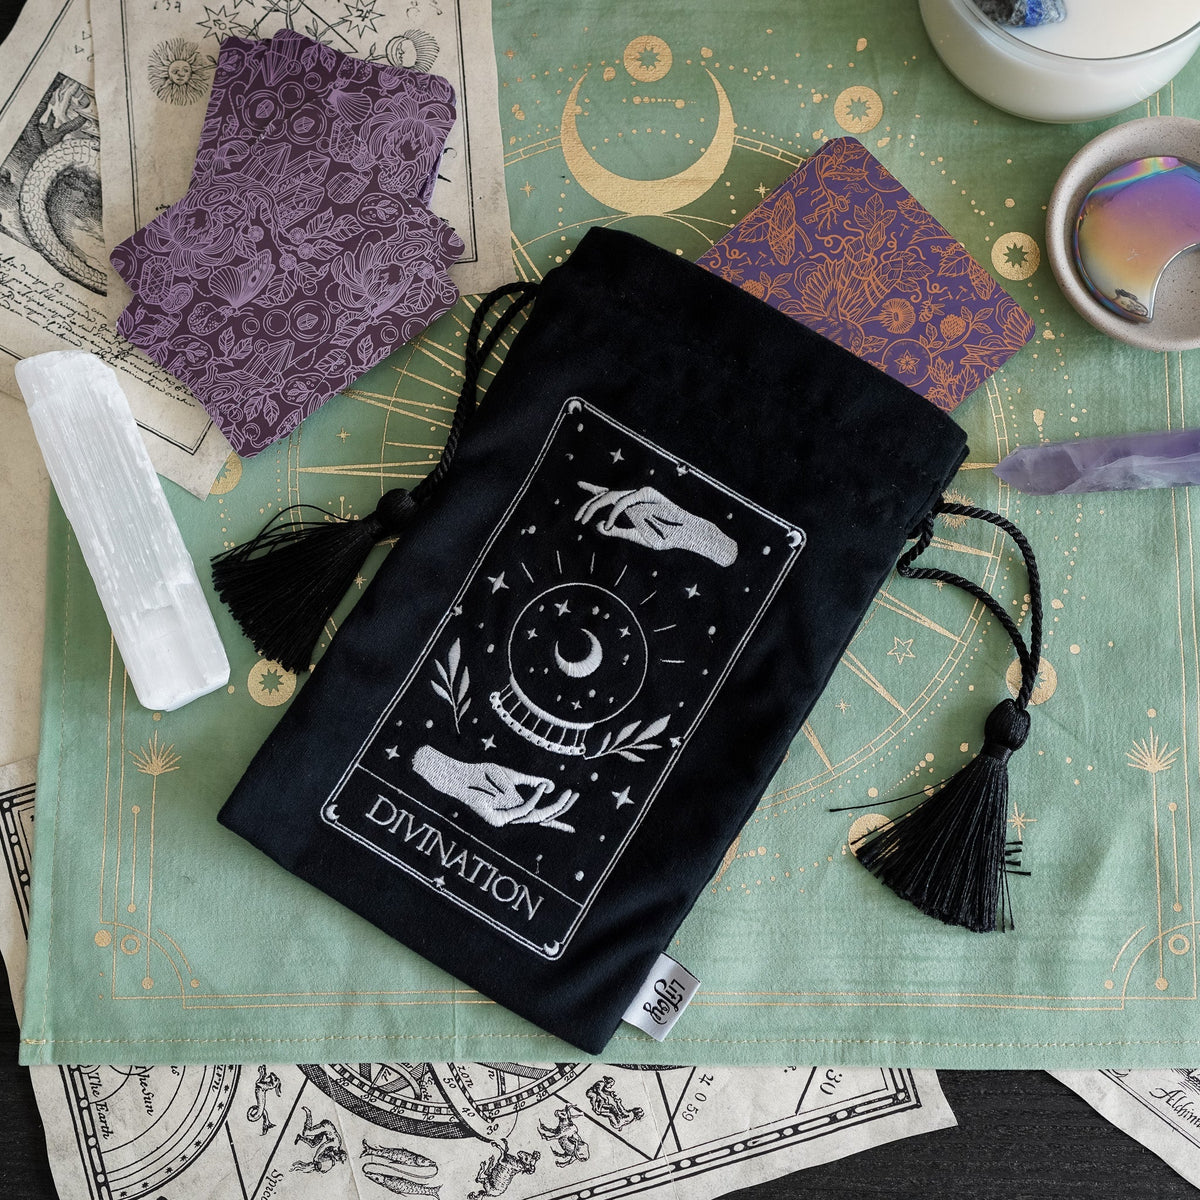 Black Divination Tarot Bag with white embroidery of a crystal ball with two hands above and below.